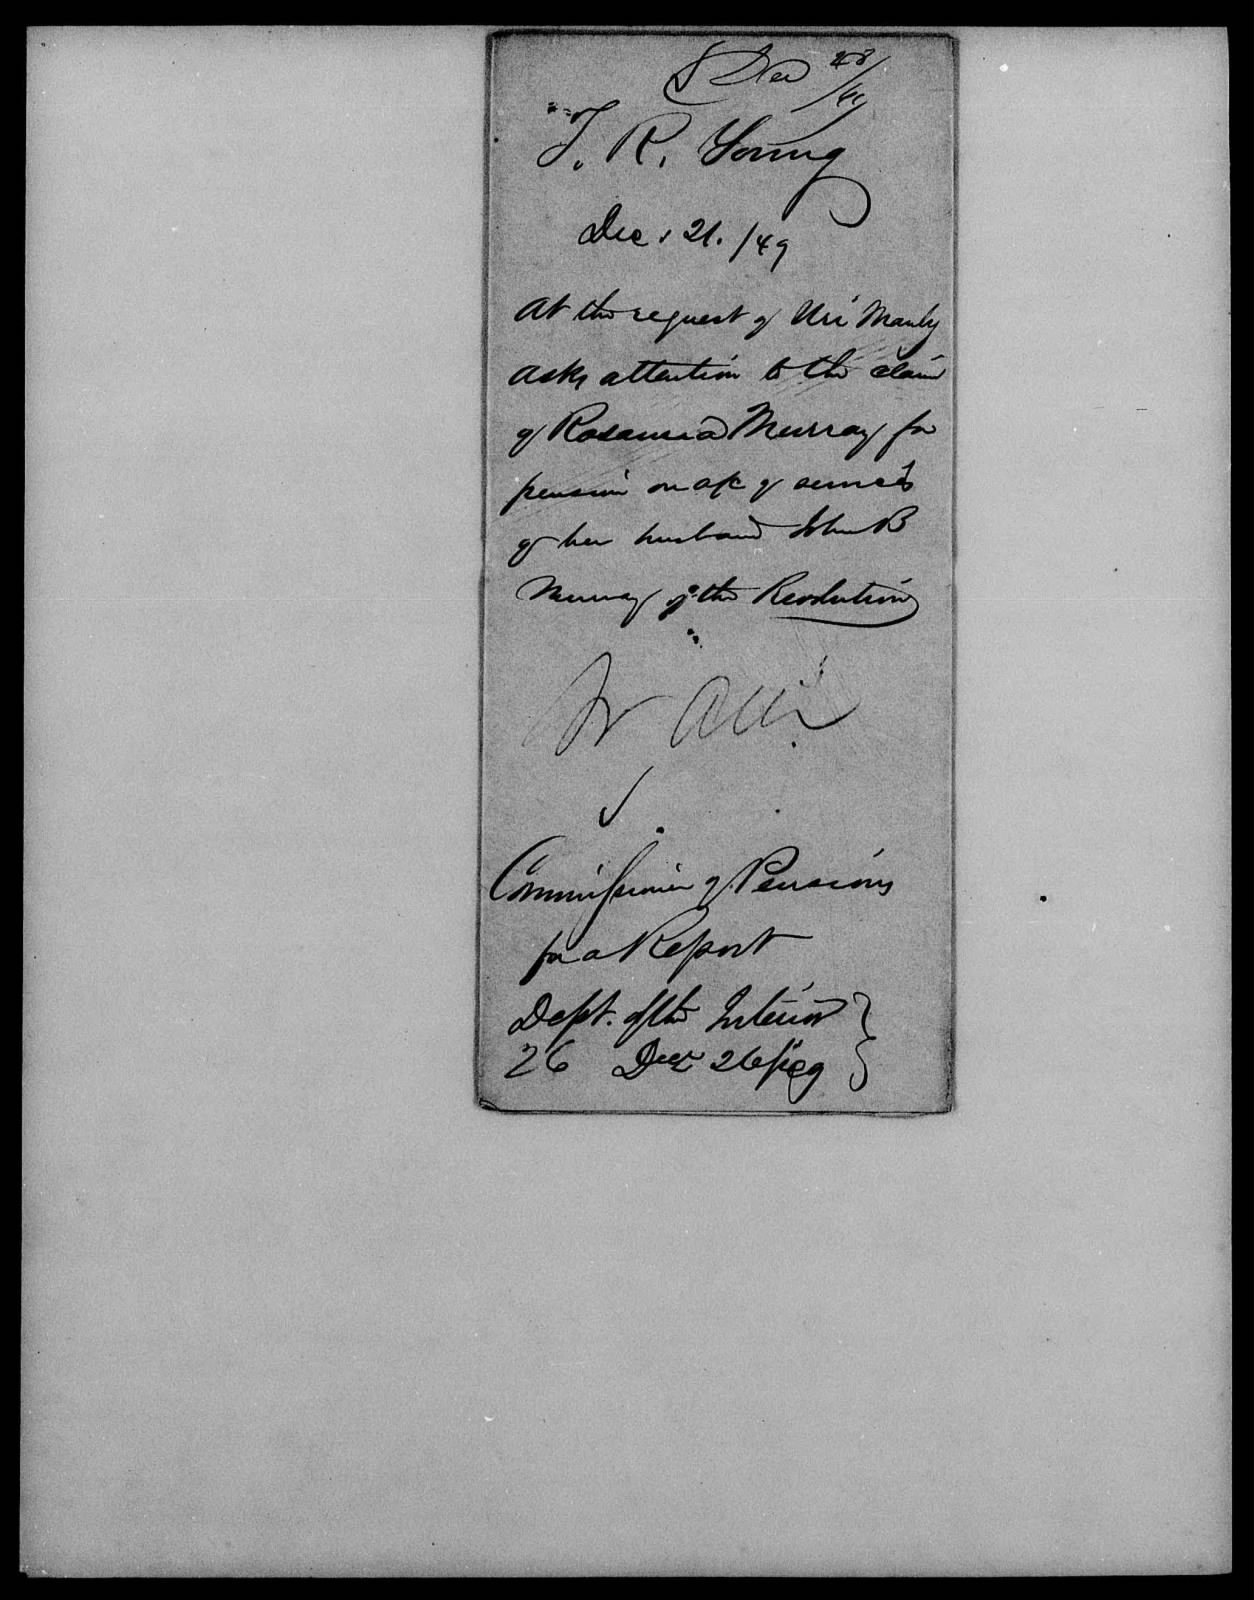 Letter from T. R. Young to Thomas Ewing, 21 December 1849, page 3